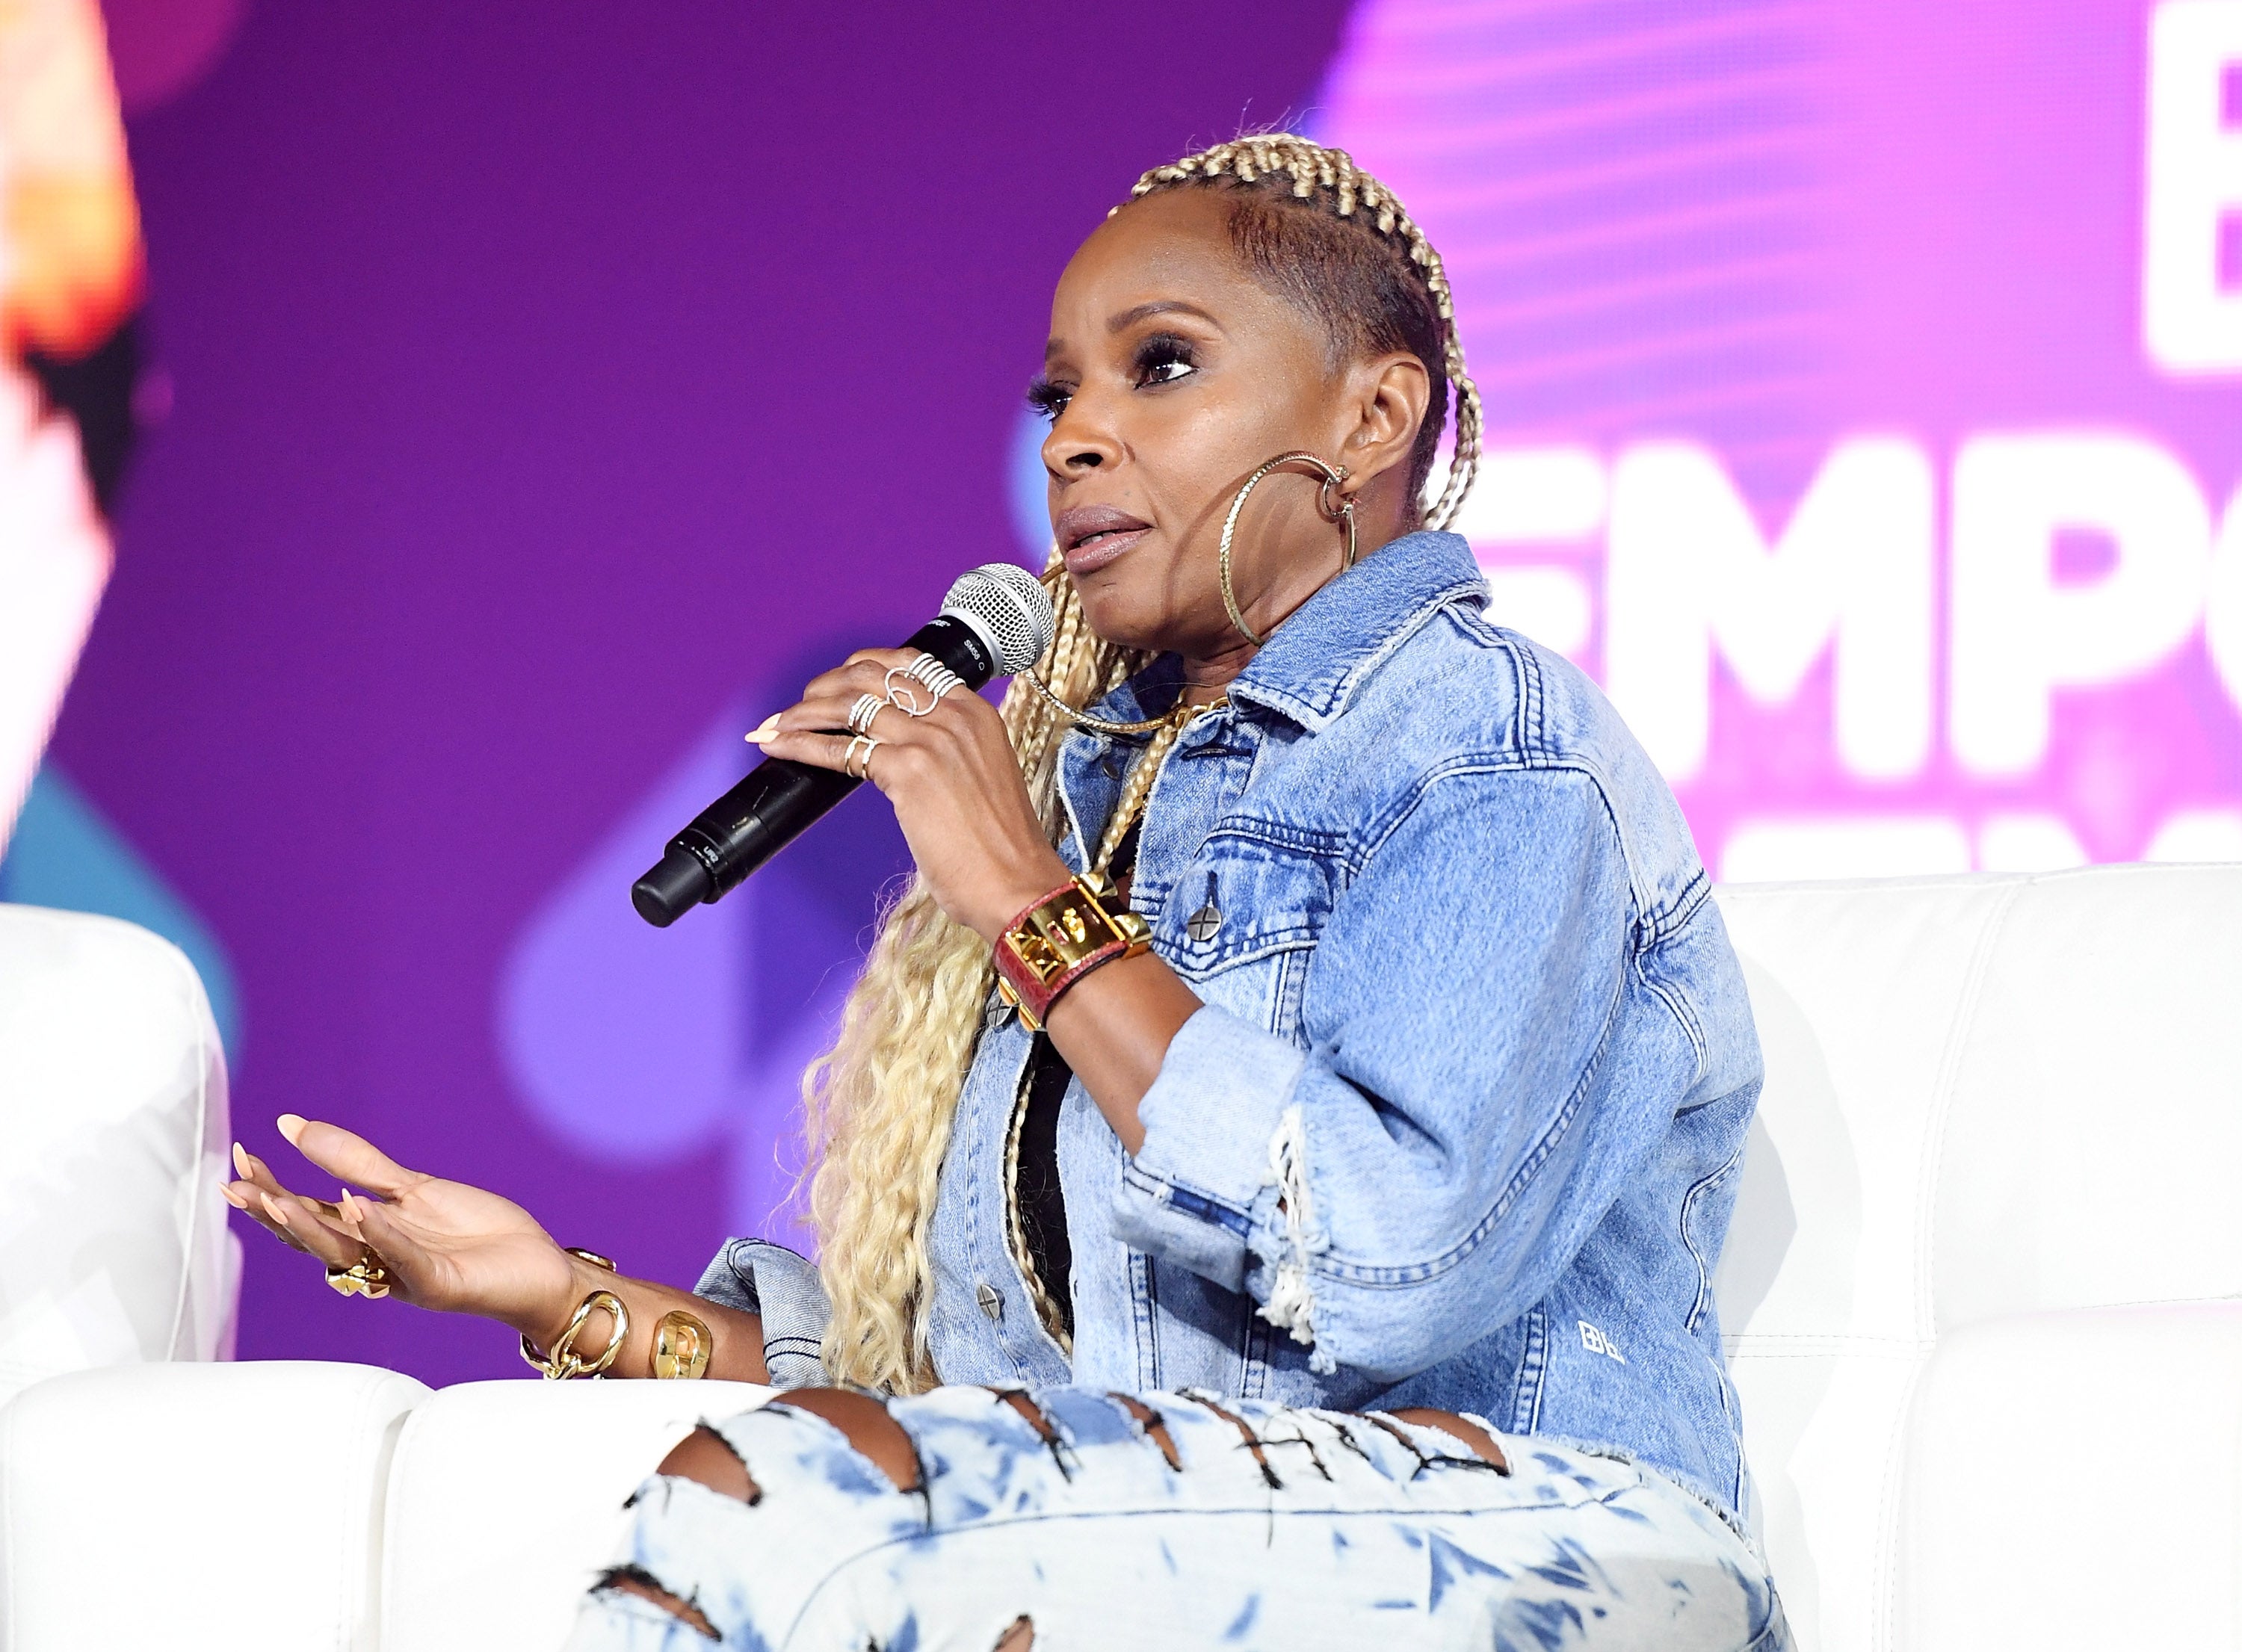 Mary J. Blige On Her Divorce From Kendu Isaacs: 'It's Been Hell'
